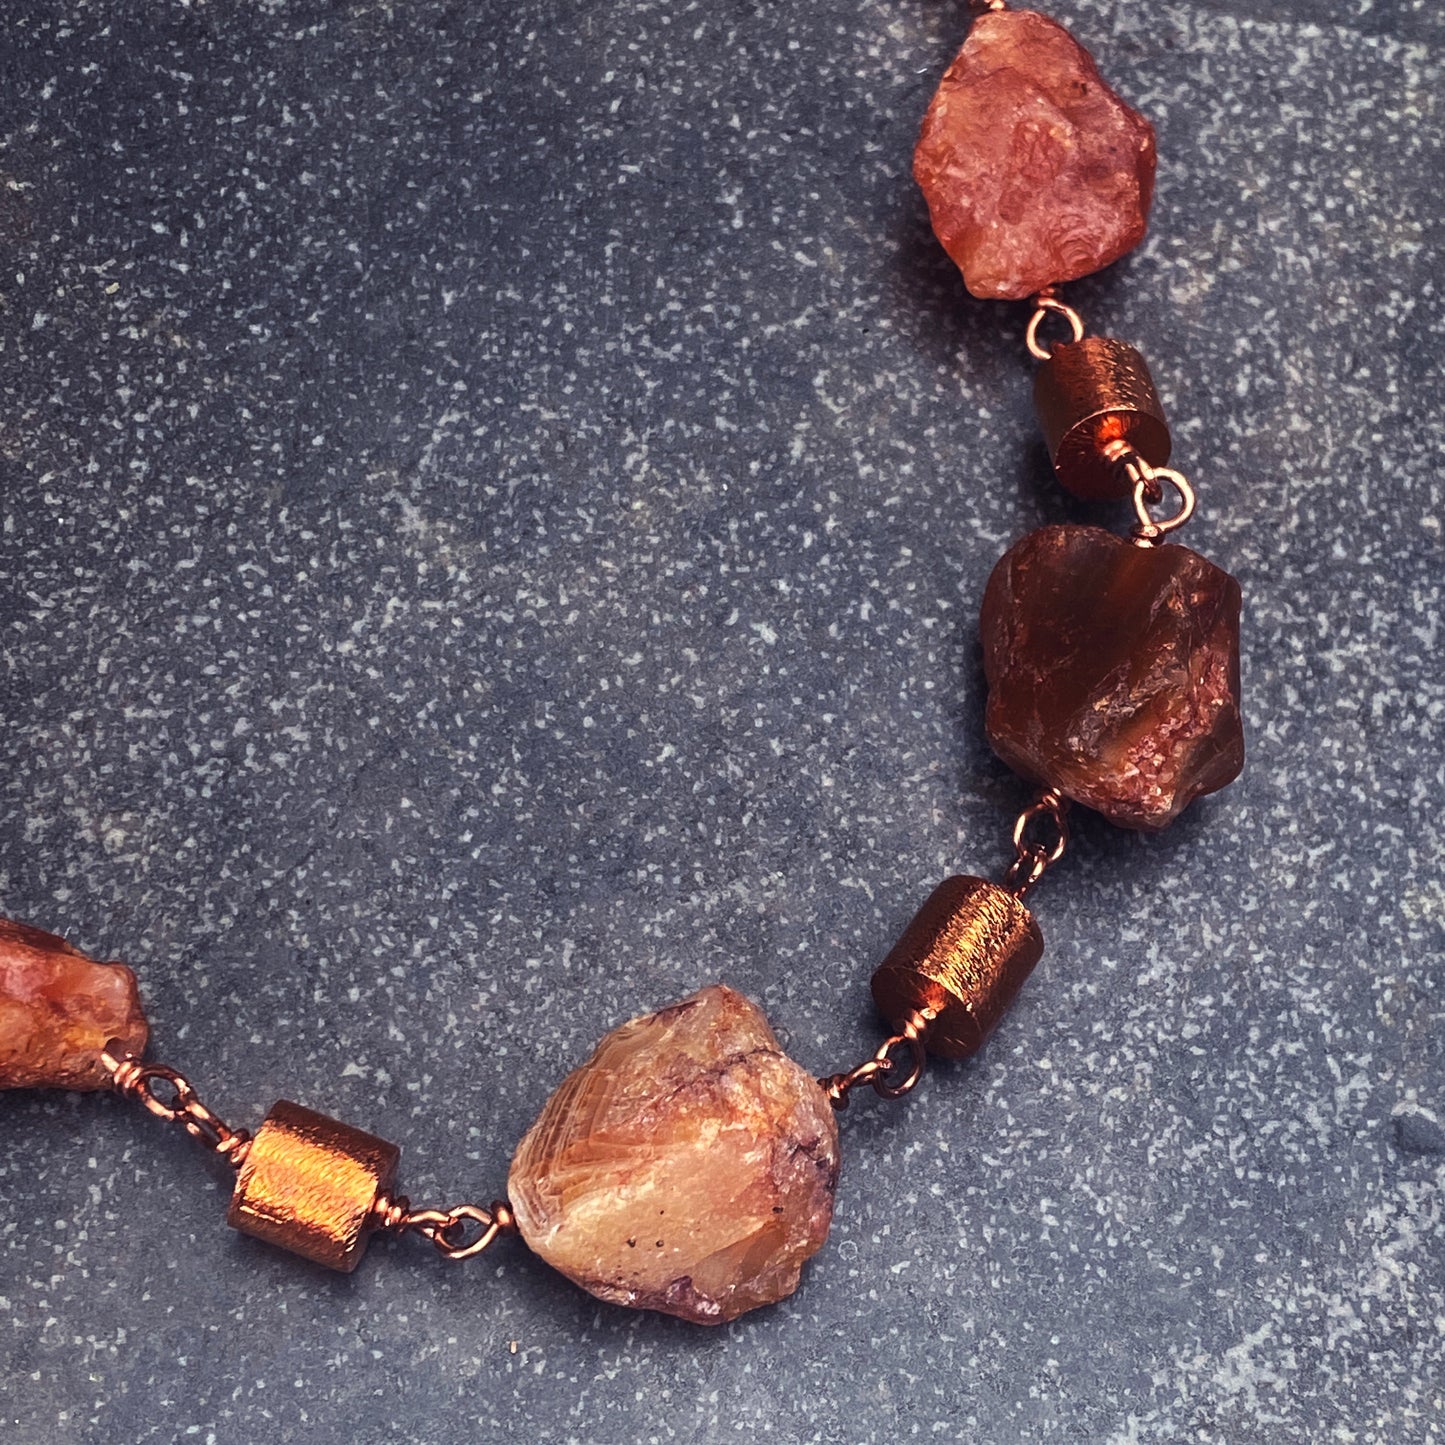 Chunky Carnelian and Copper Necklace